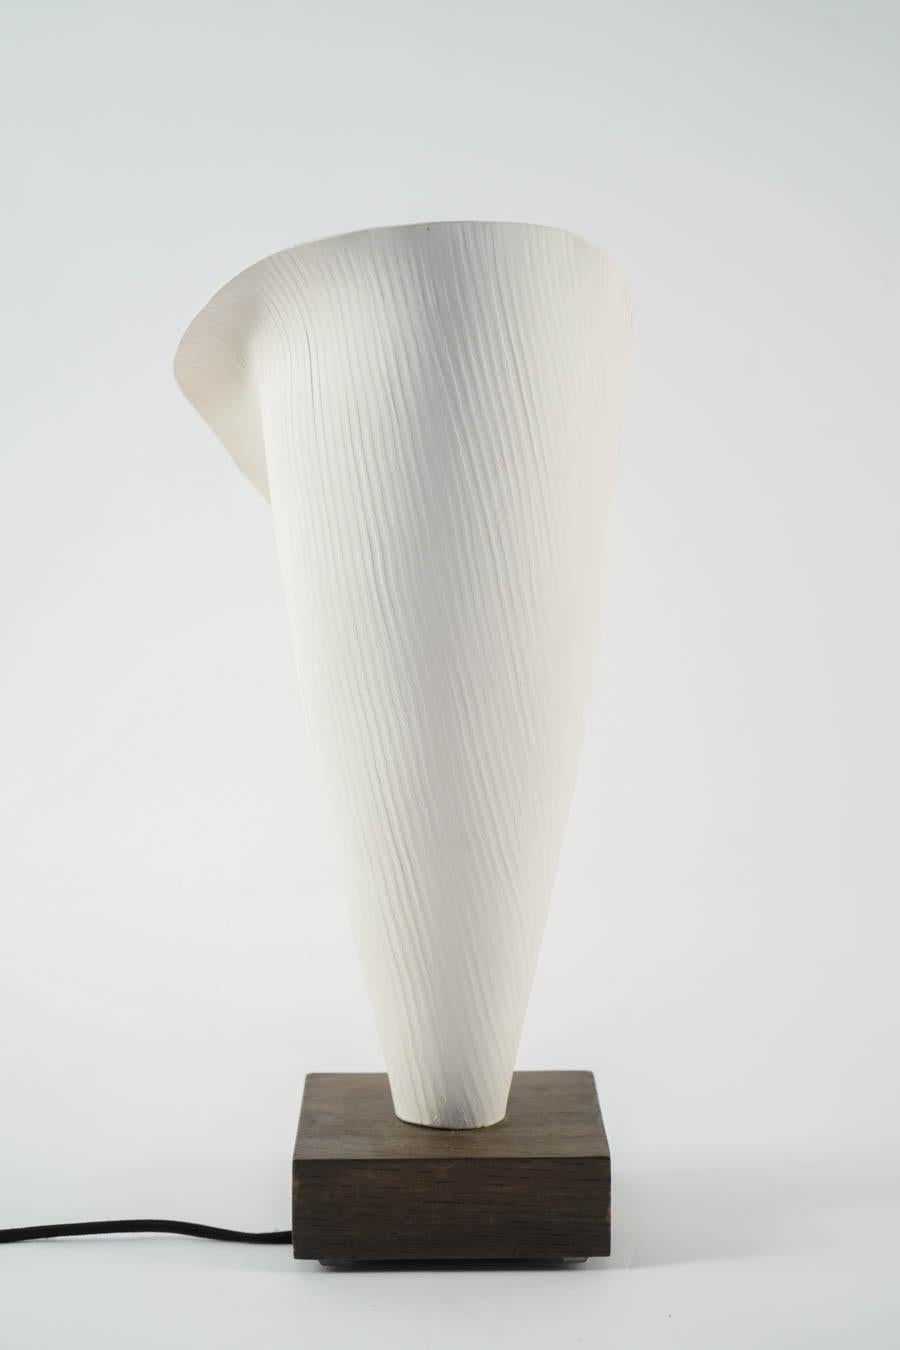 Pair of Table Lamps, White Ceramic Lamp Made by Hand Mounted on Solid Oak 3